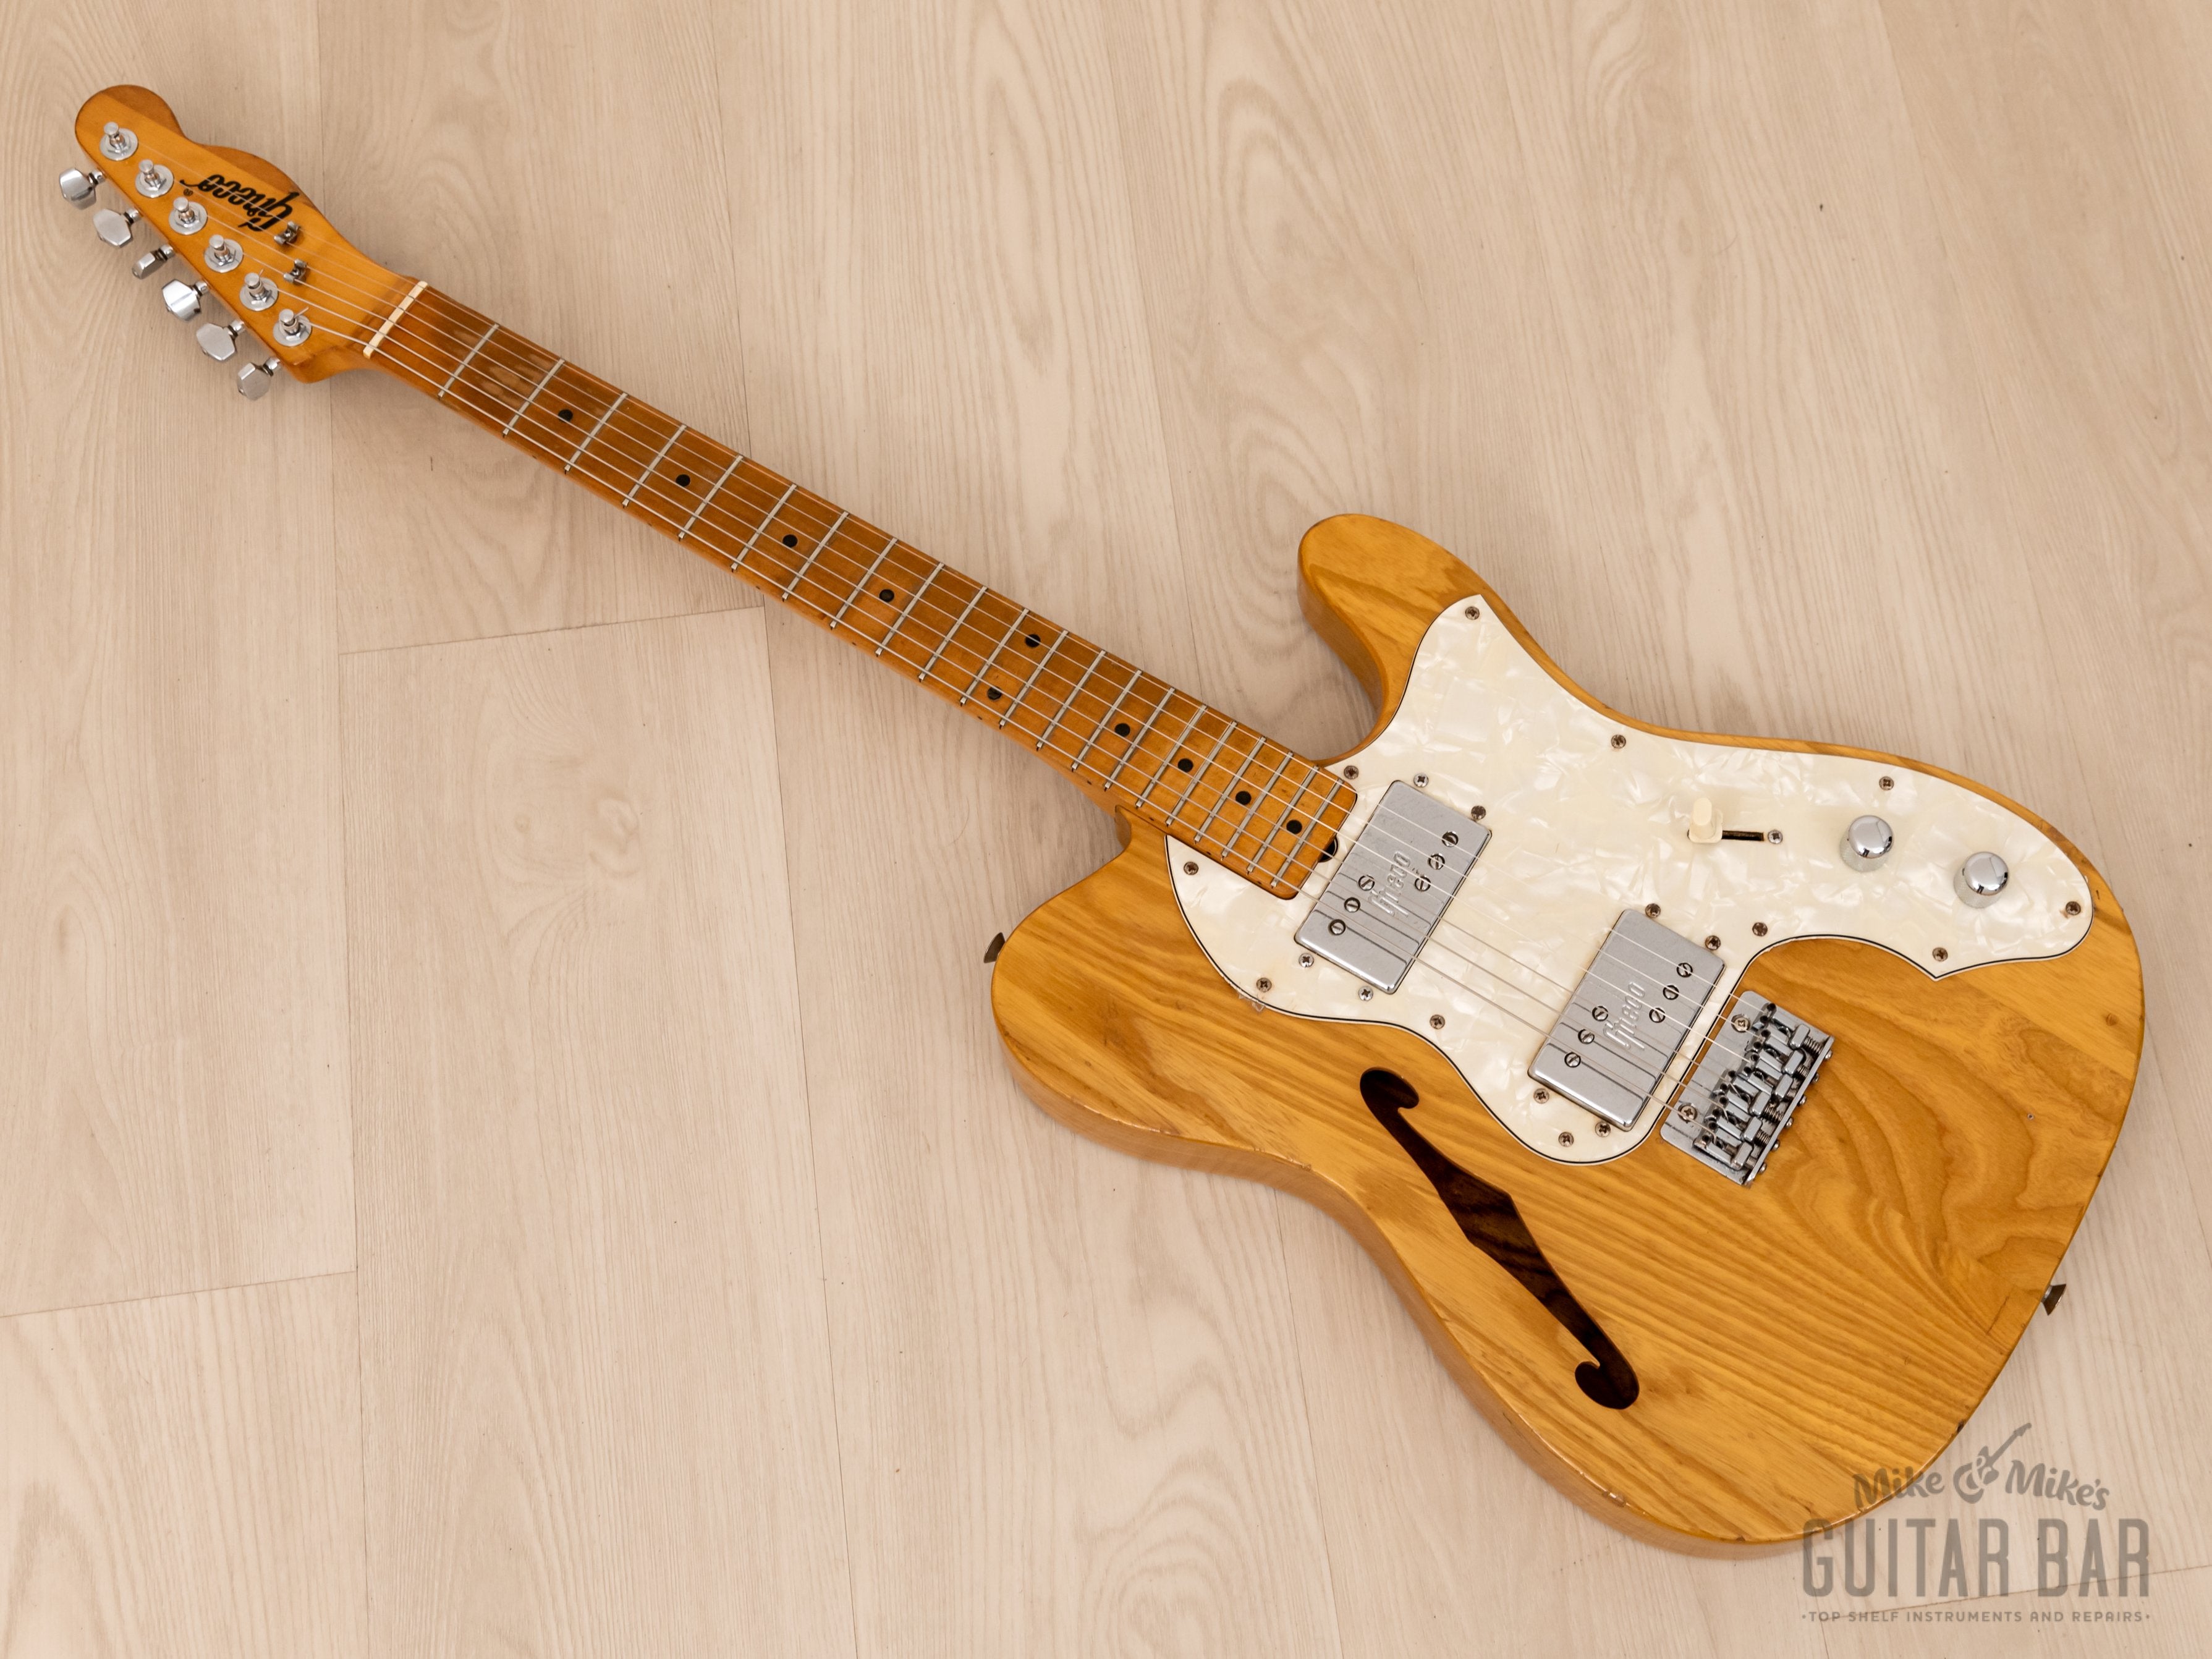 1974 Greco Spacey Sounds TE-500 Thinline T-Style Semi-Hollow Electric Guitar, Japan Matsumoku